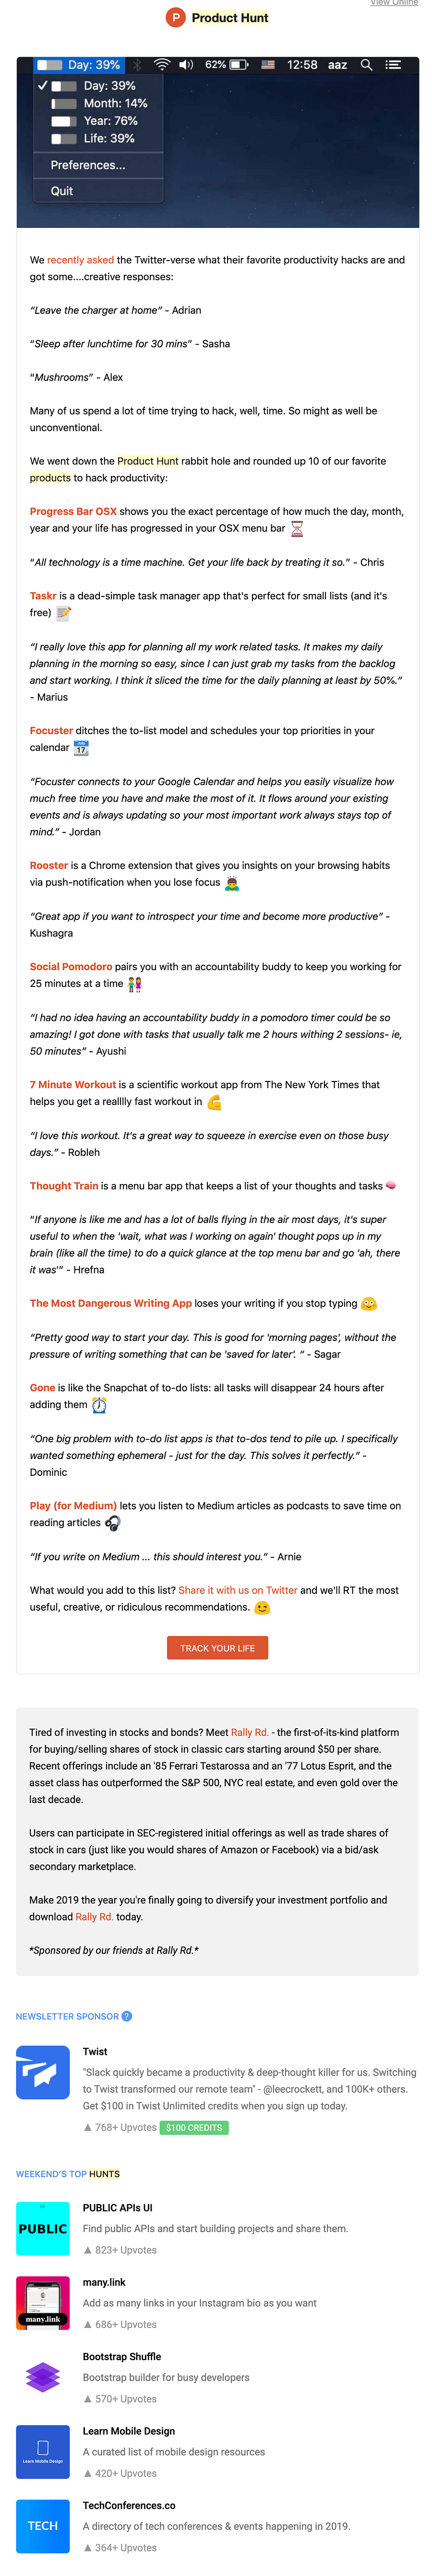 Product Hunt power of newsletter